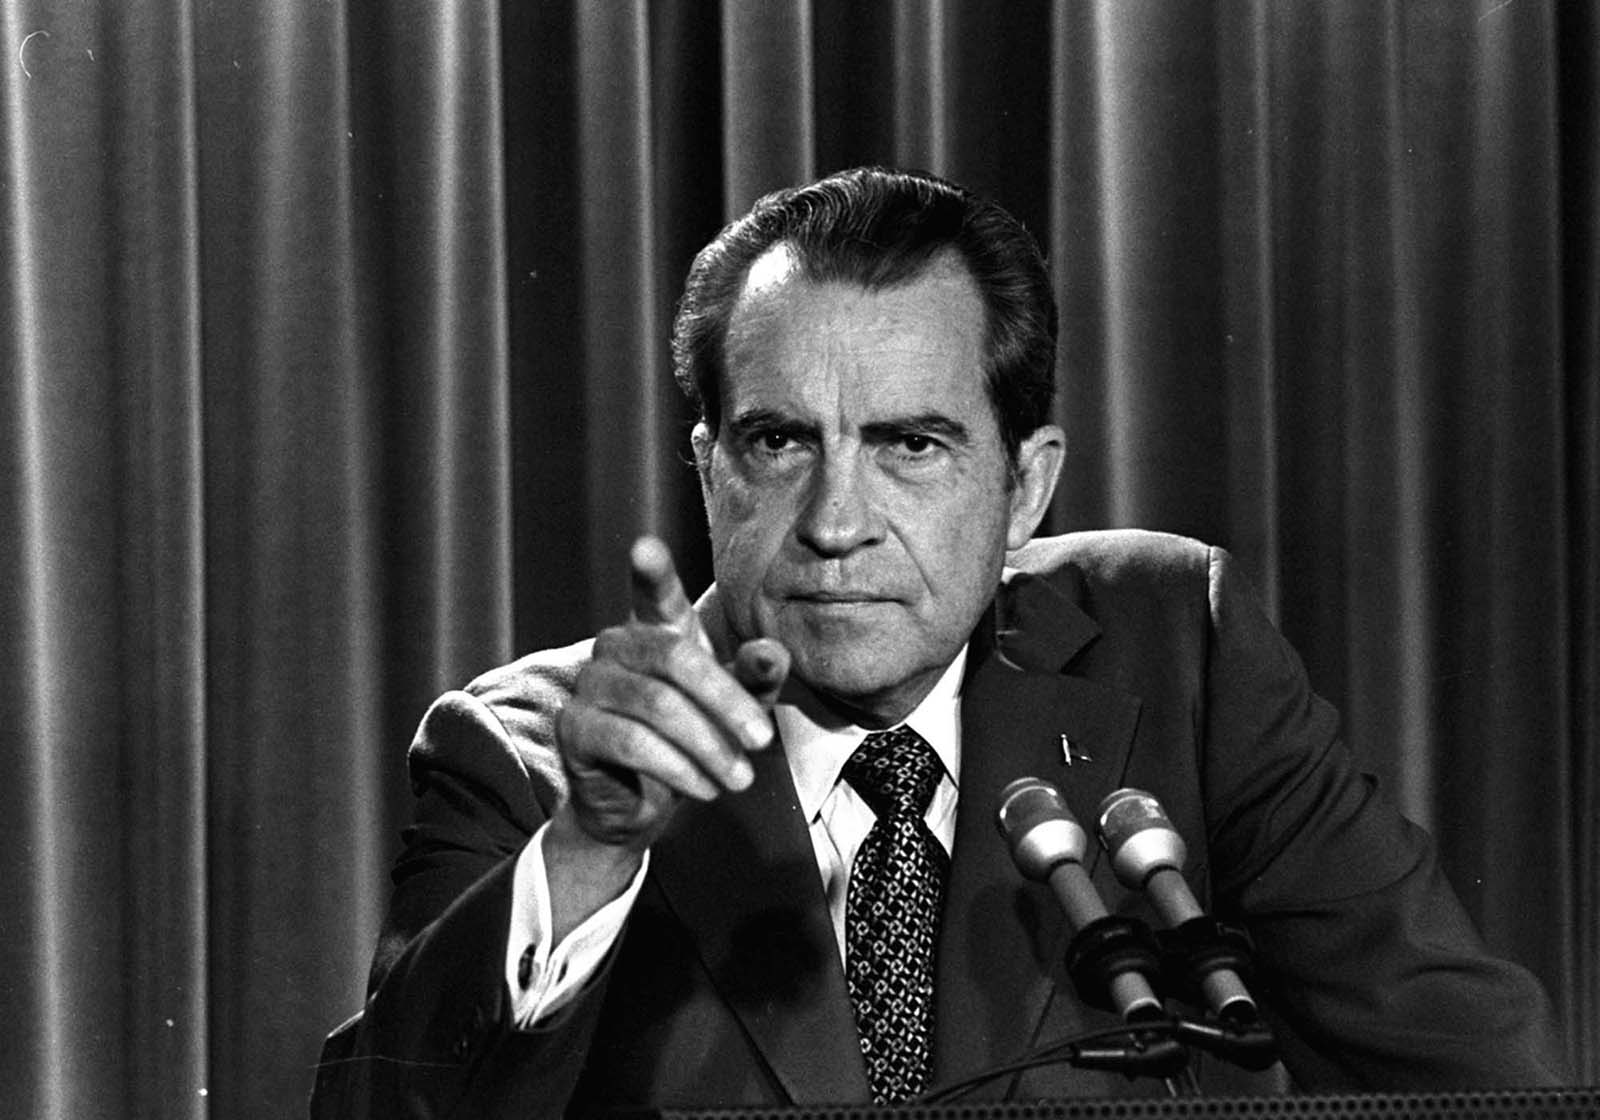 Why Watergate was such a big scandal?